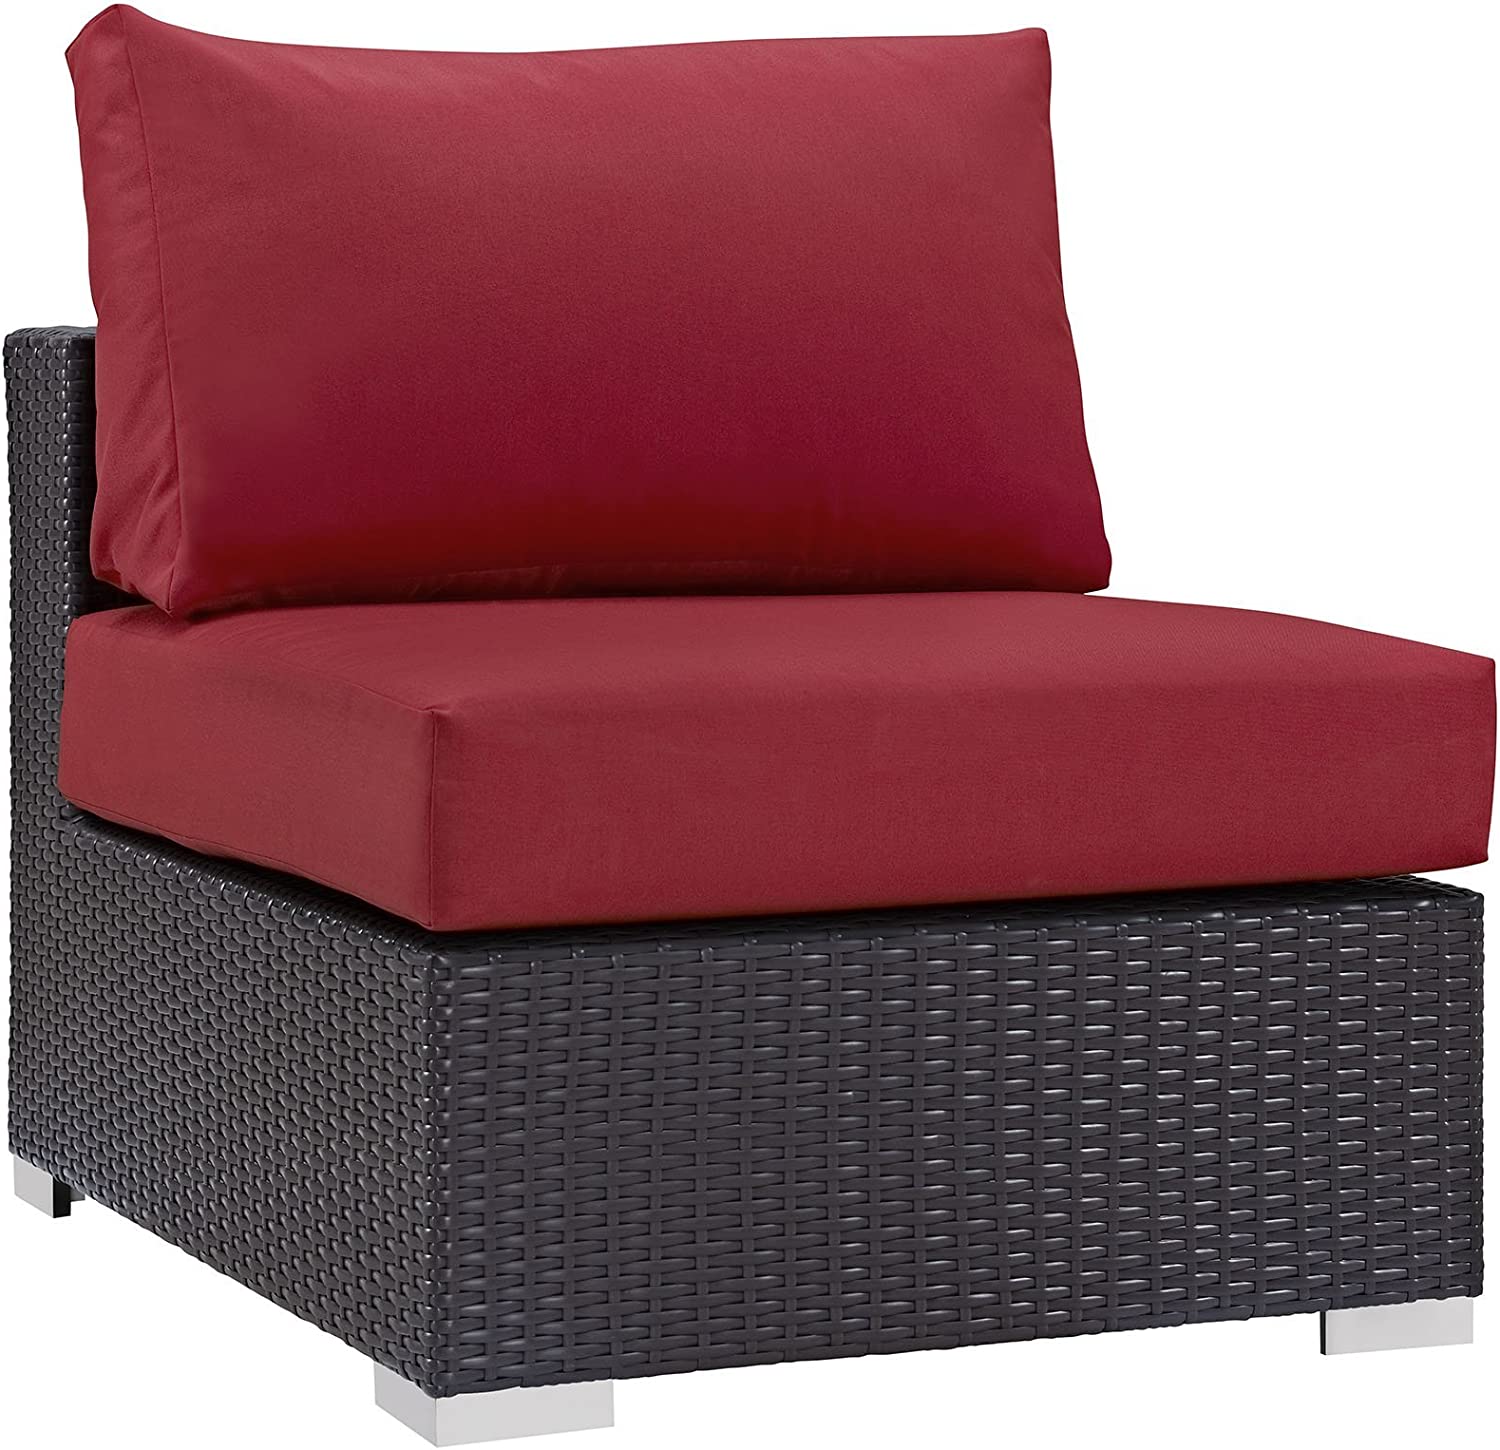 Modway Convene Wicker Rattan Outdoor Patio Sectional Sofa Armless Chair in Espresso Red